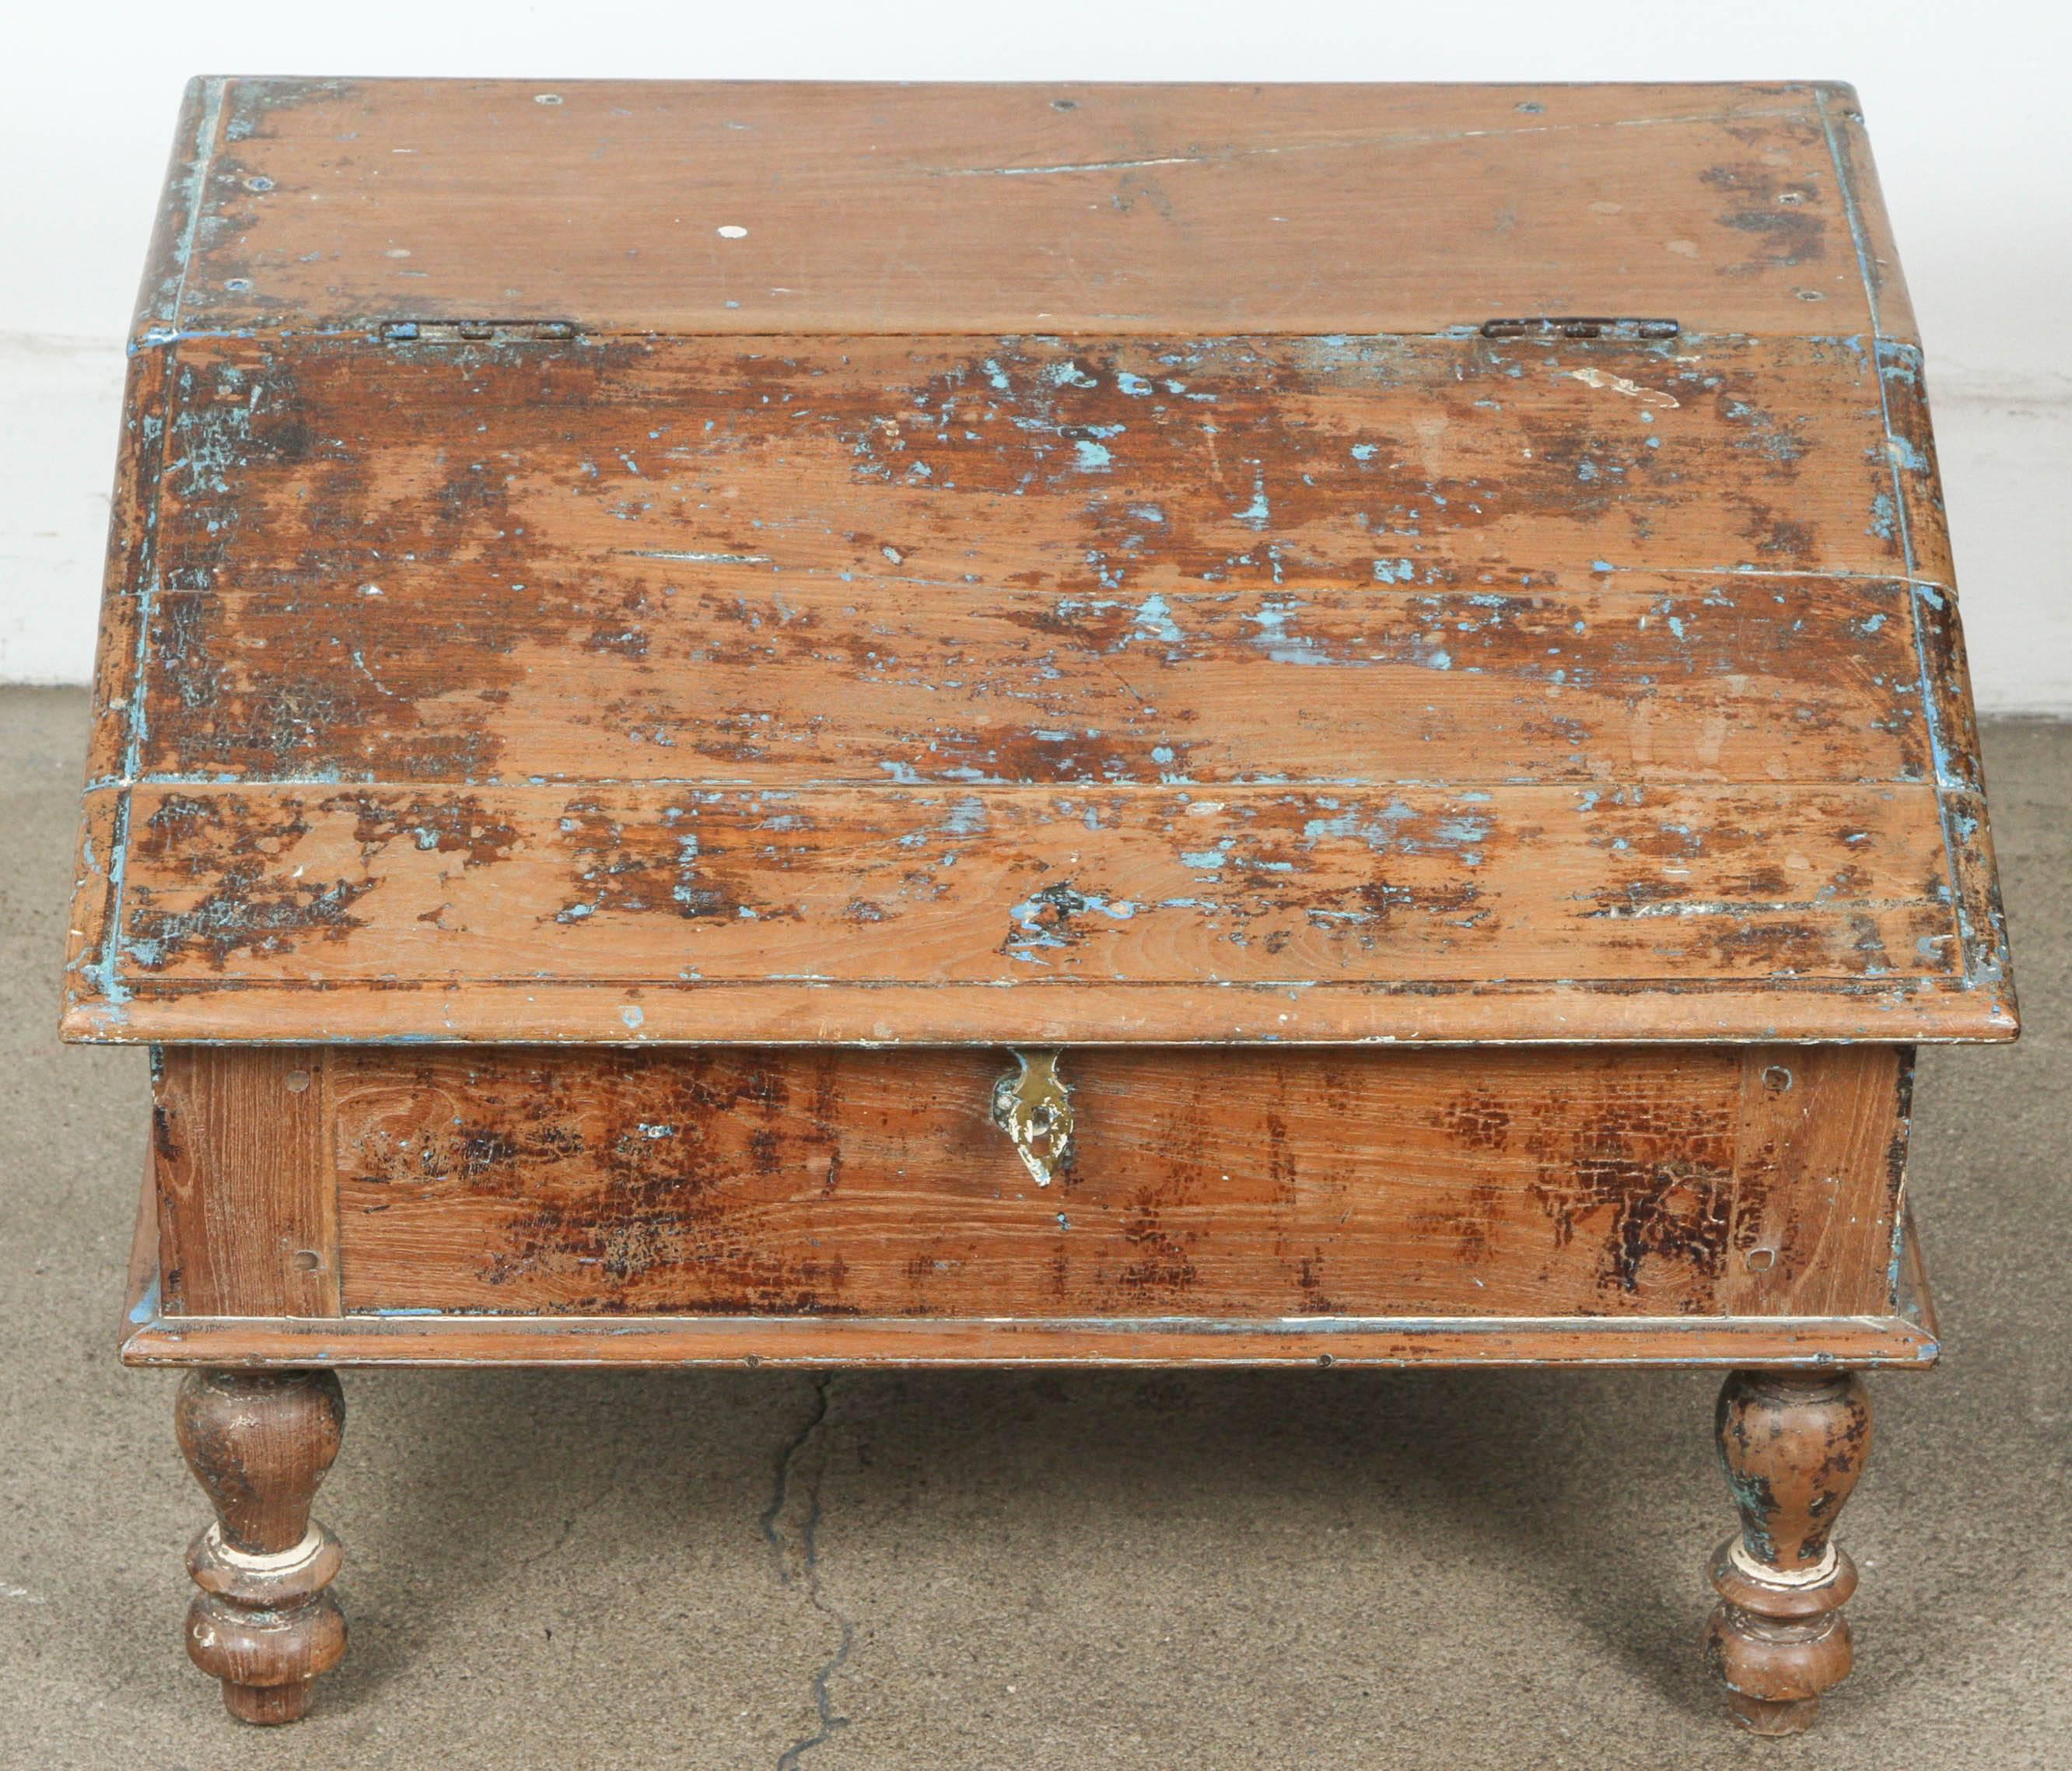 South India low writing desk with storage.
19th century with nice patina with some old blue paint and on four legs.
Treasure box or storage trunk.